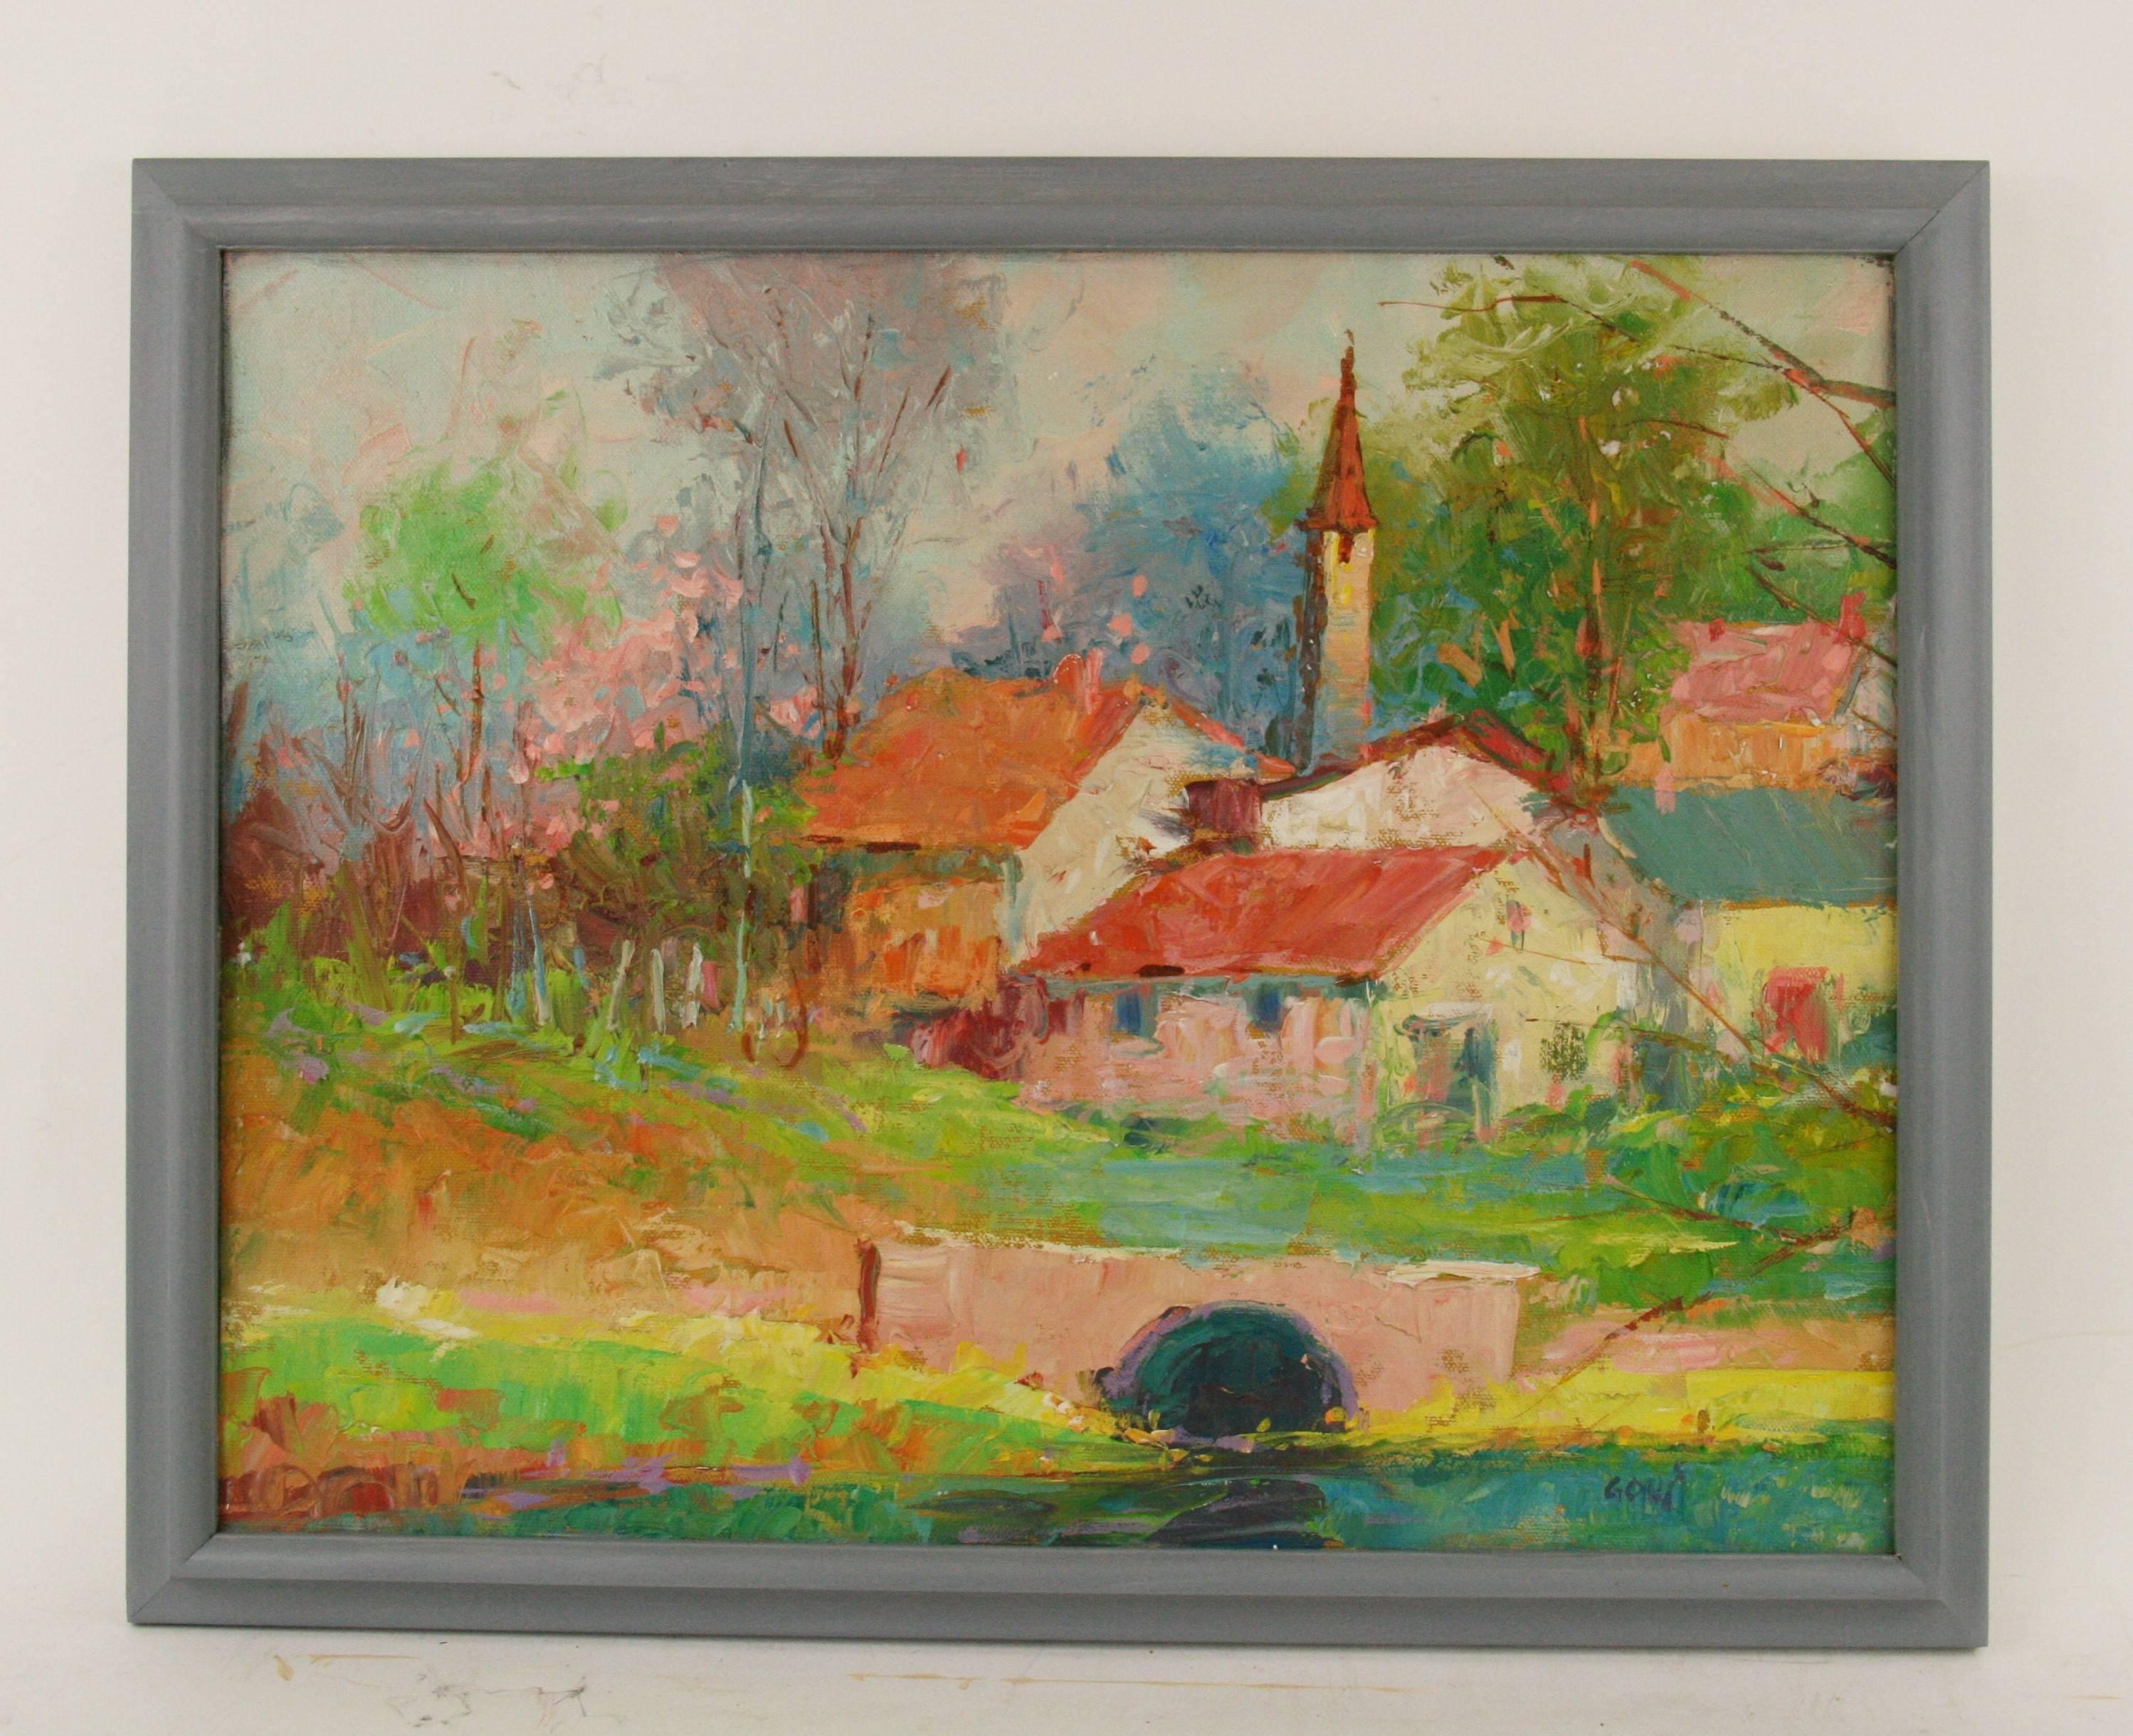 #5-2545 A French village, oil painting on artist board displayed in a gray painted wood frame. Signed lower right by Govi. Image size 13.5 H x 17 W.